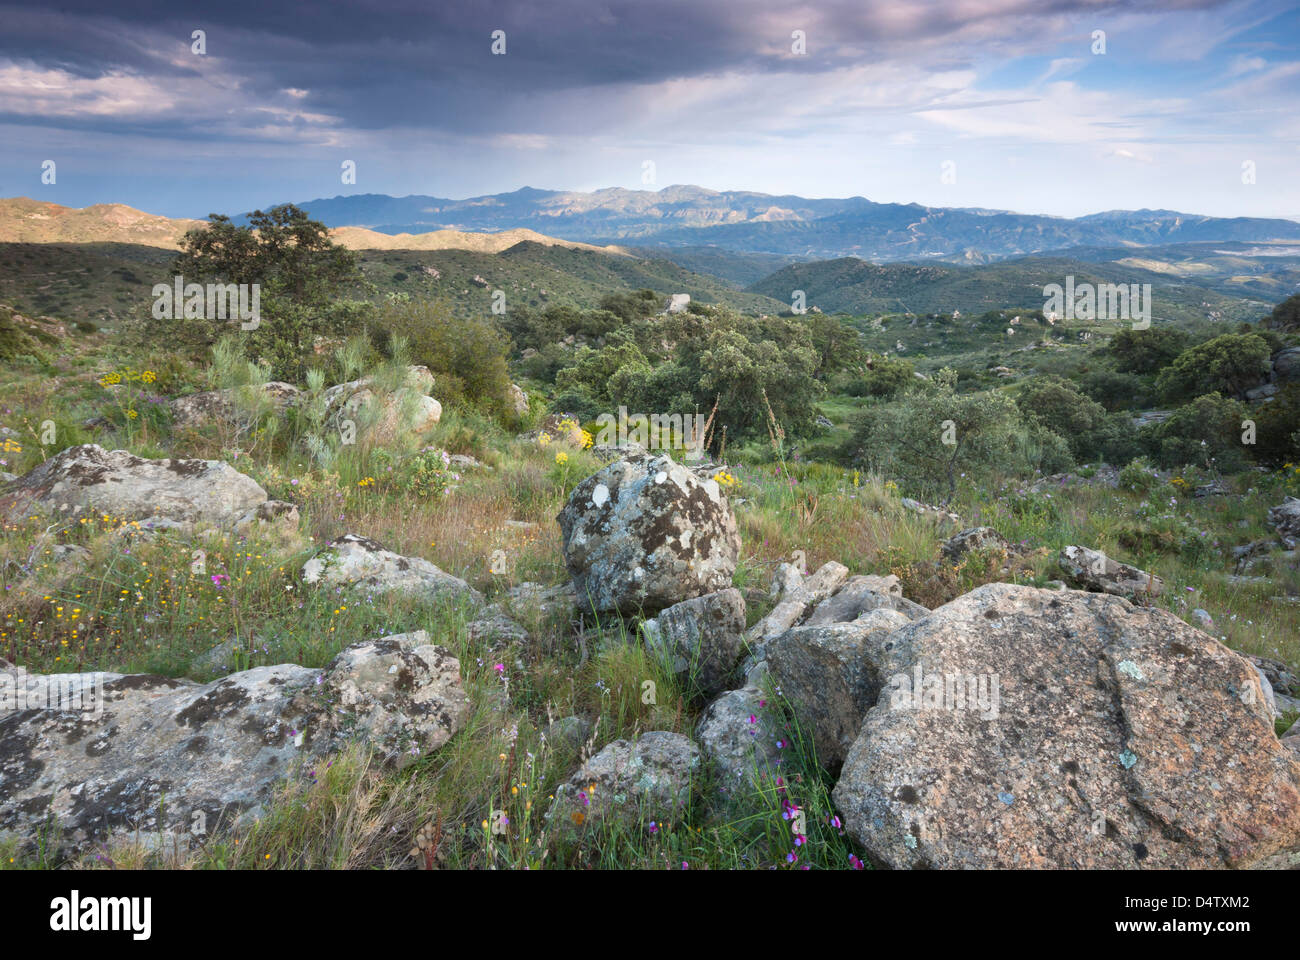 Southernly View from Sierra de la Atalaya, Adalusia; Almeria province, Spain Stock Photo